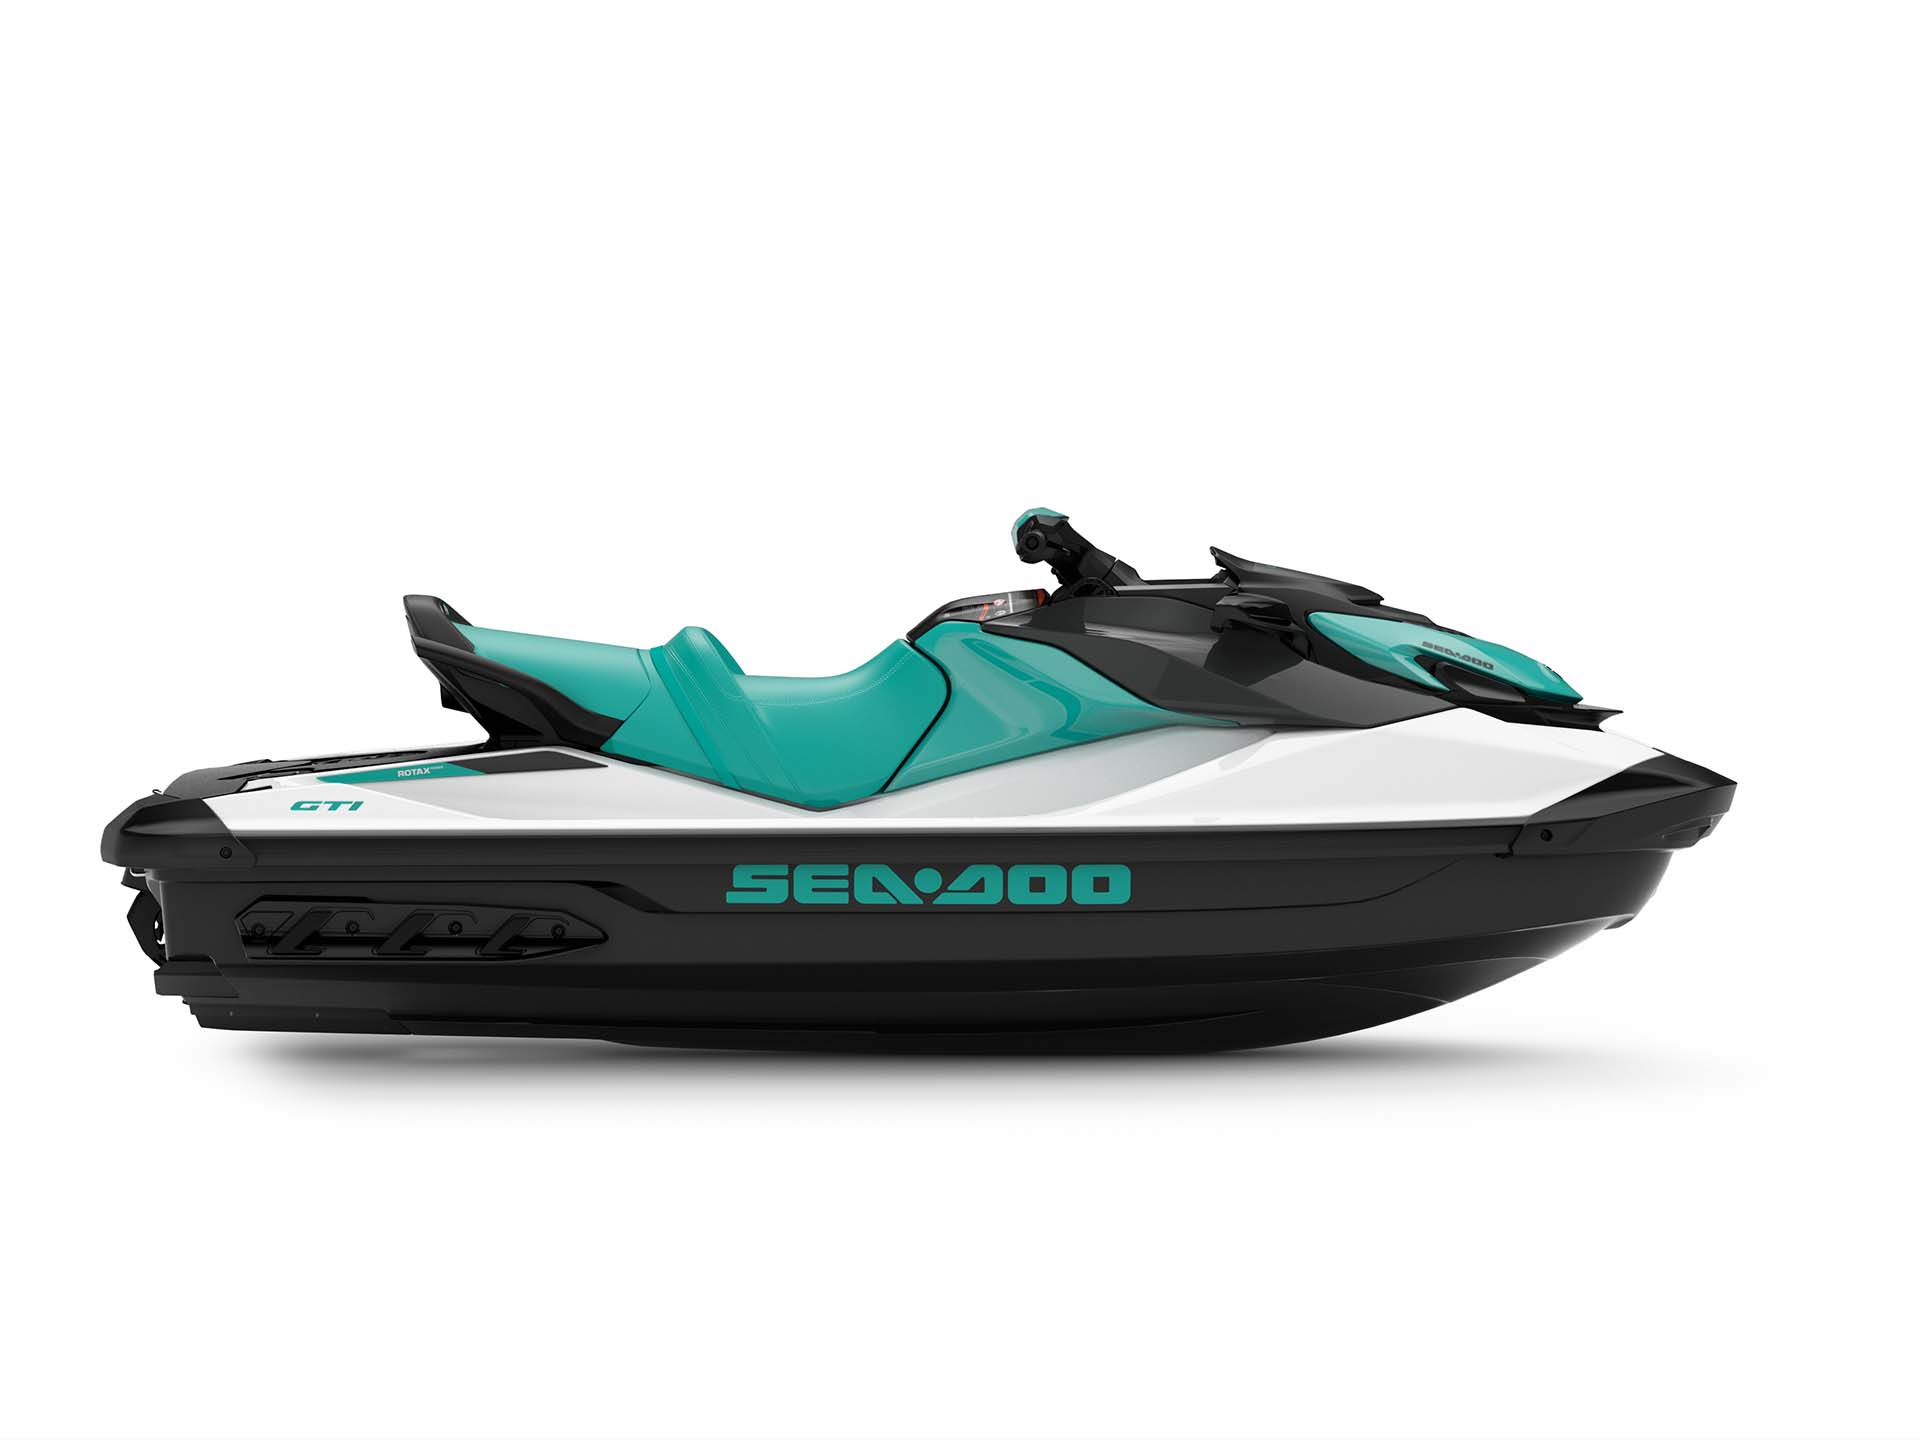 Discover the Sea-Doo lineup with JT All Season Motorsports Inc.